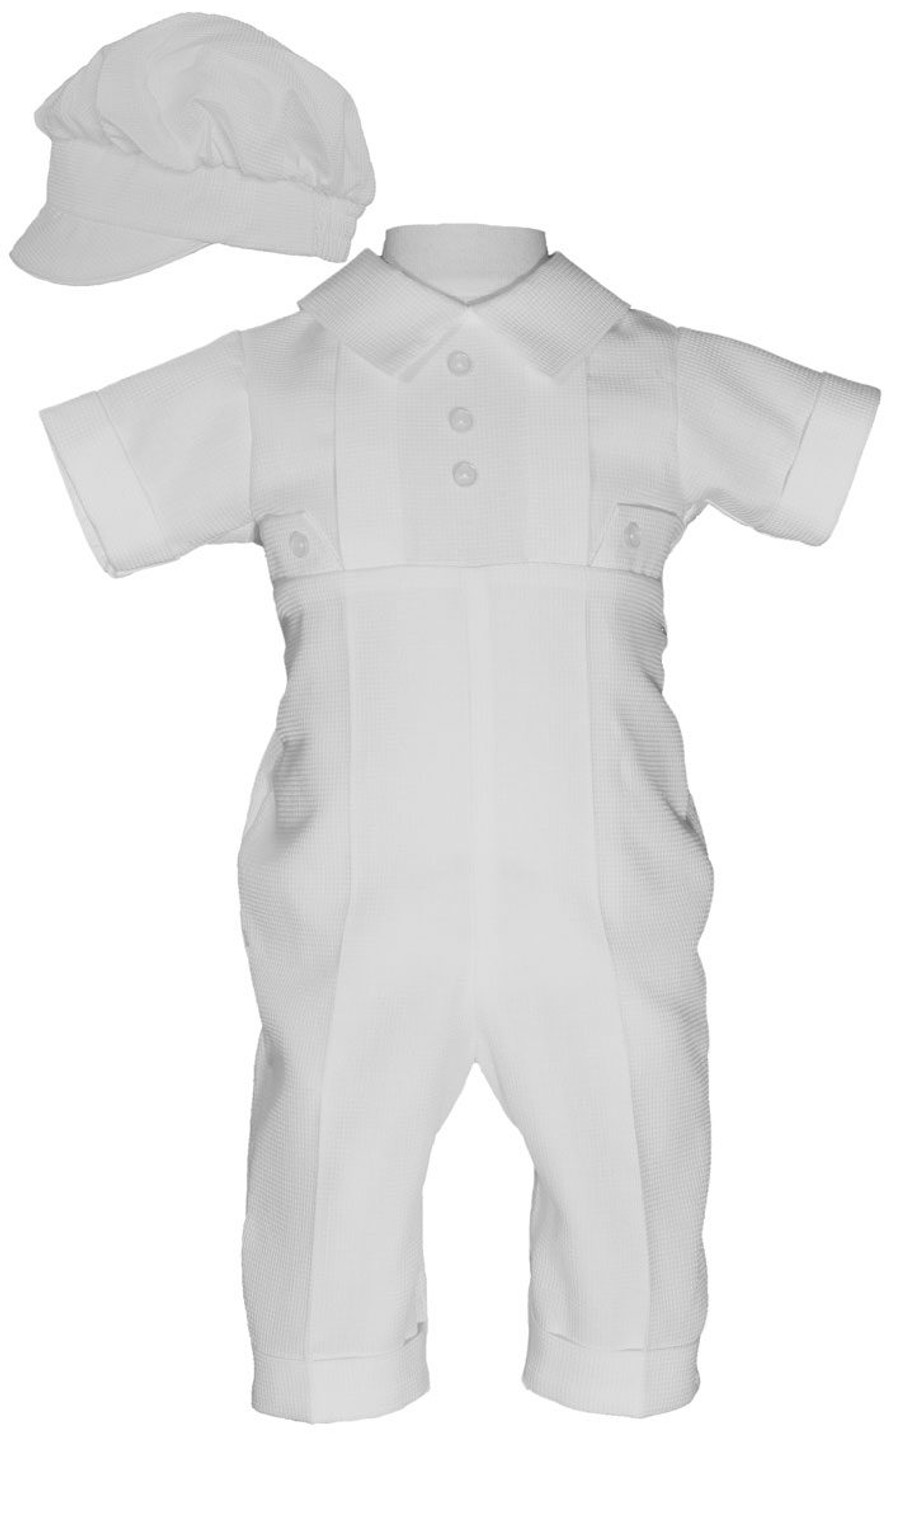 Classic boys christening outfit made of elegant waffle pique poly cotton fabric.